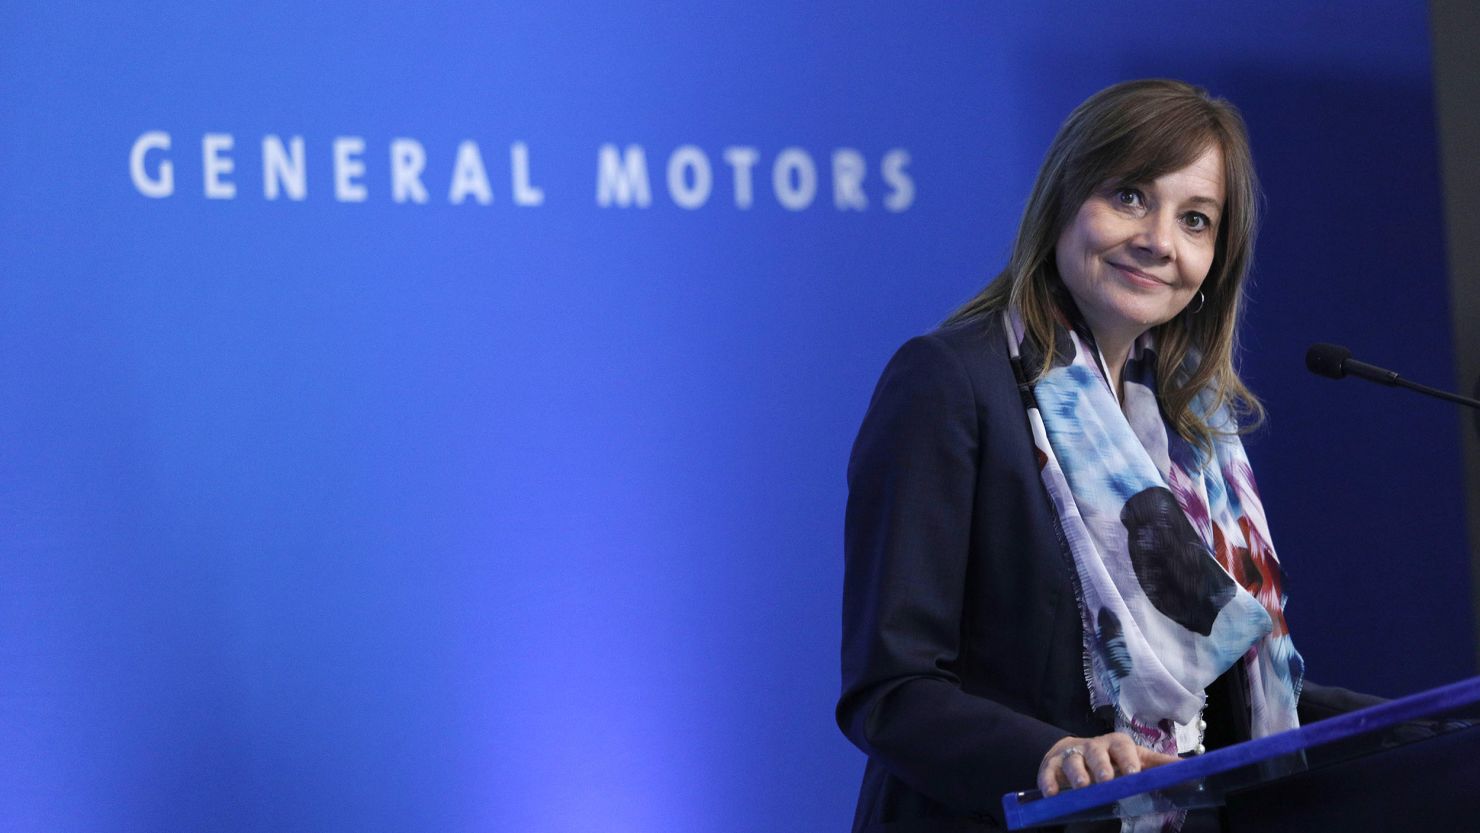 General Motors CEO Mary Barra, shown here in 2018, is among the 37 women running Fortune 500 companies, an all-time record.